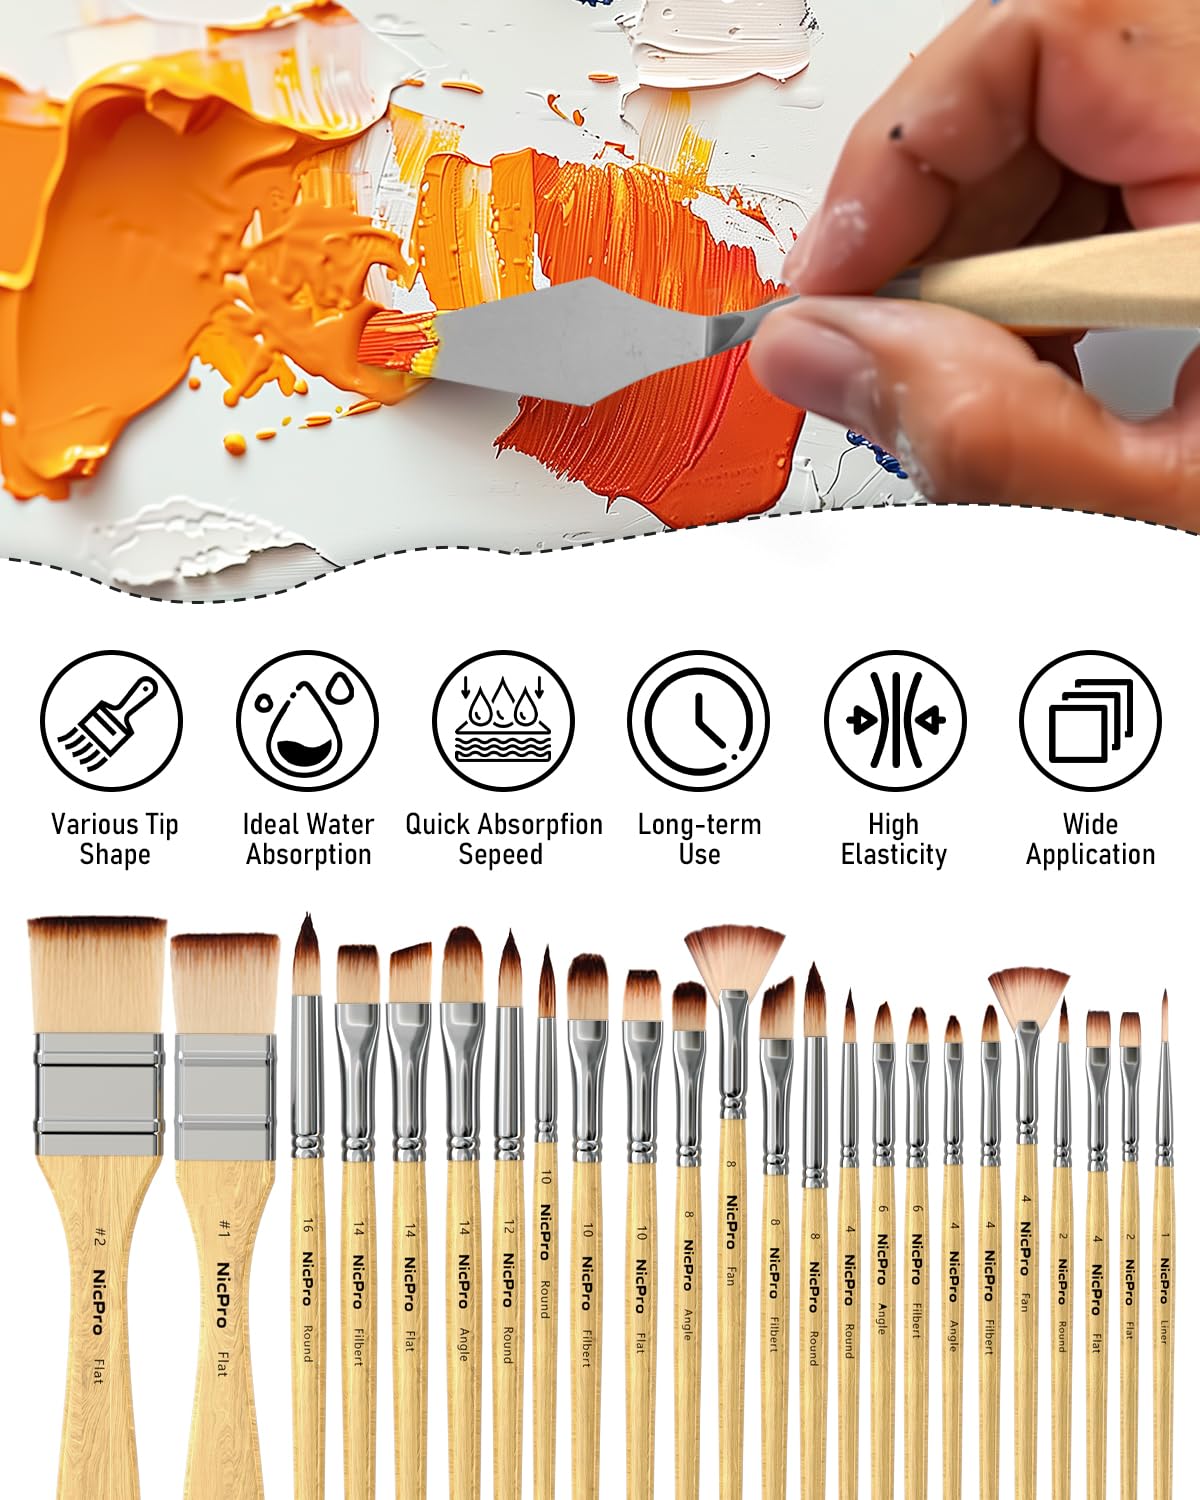 Nicpro 26pcs Paint Brush Set, Professional Paintbrushes with Palette Knife and Cloth Roll, Artist Paint Brushes for Acrylic Painting, Oil, Watercolor & Gouache, Adults Kids Art Painting Tools Supplies